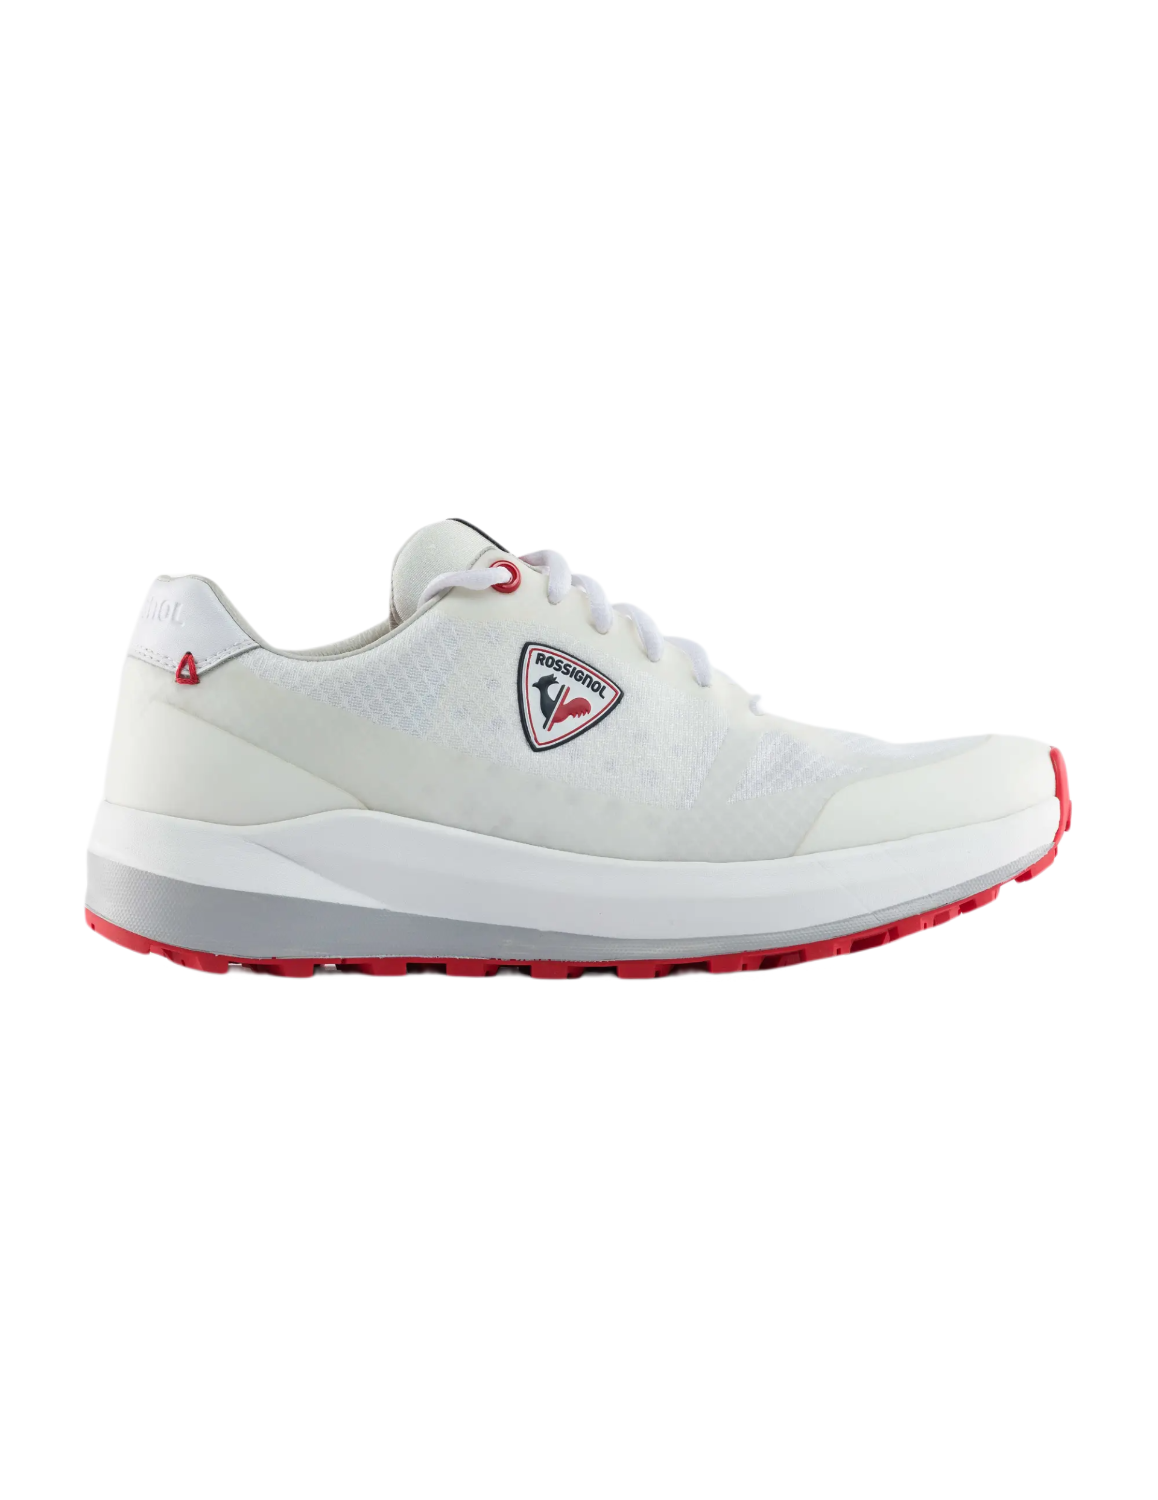 Chaussures de Running pour femme Rossignol RSC Blanches